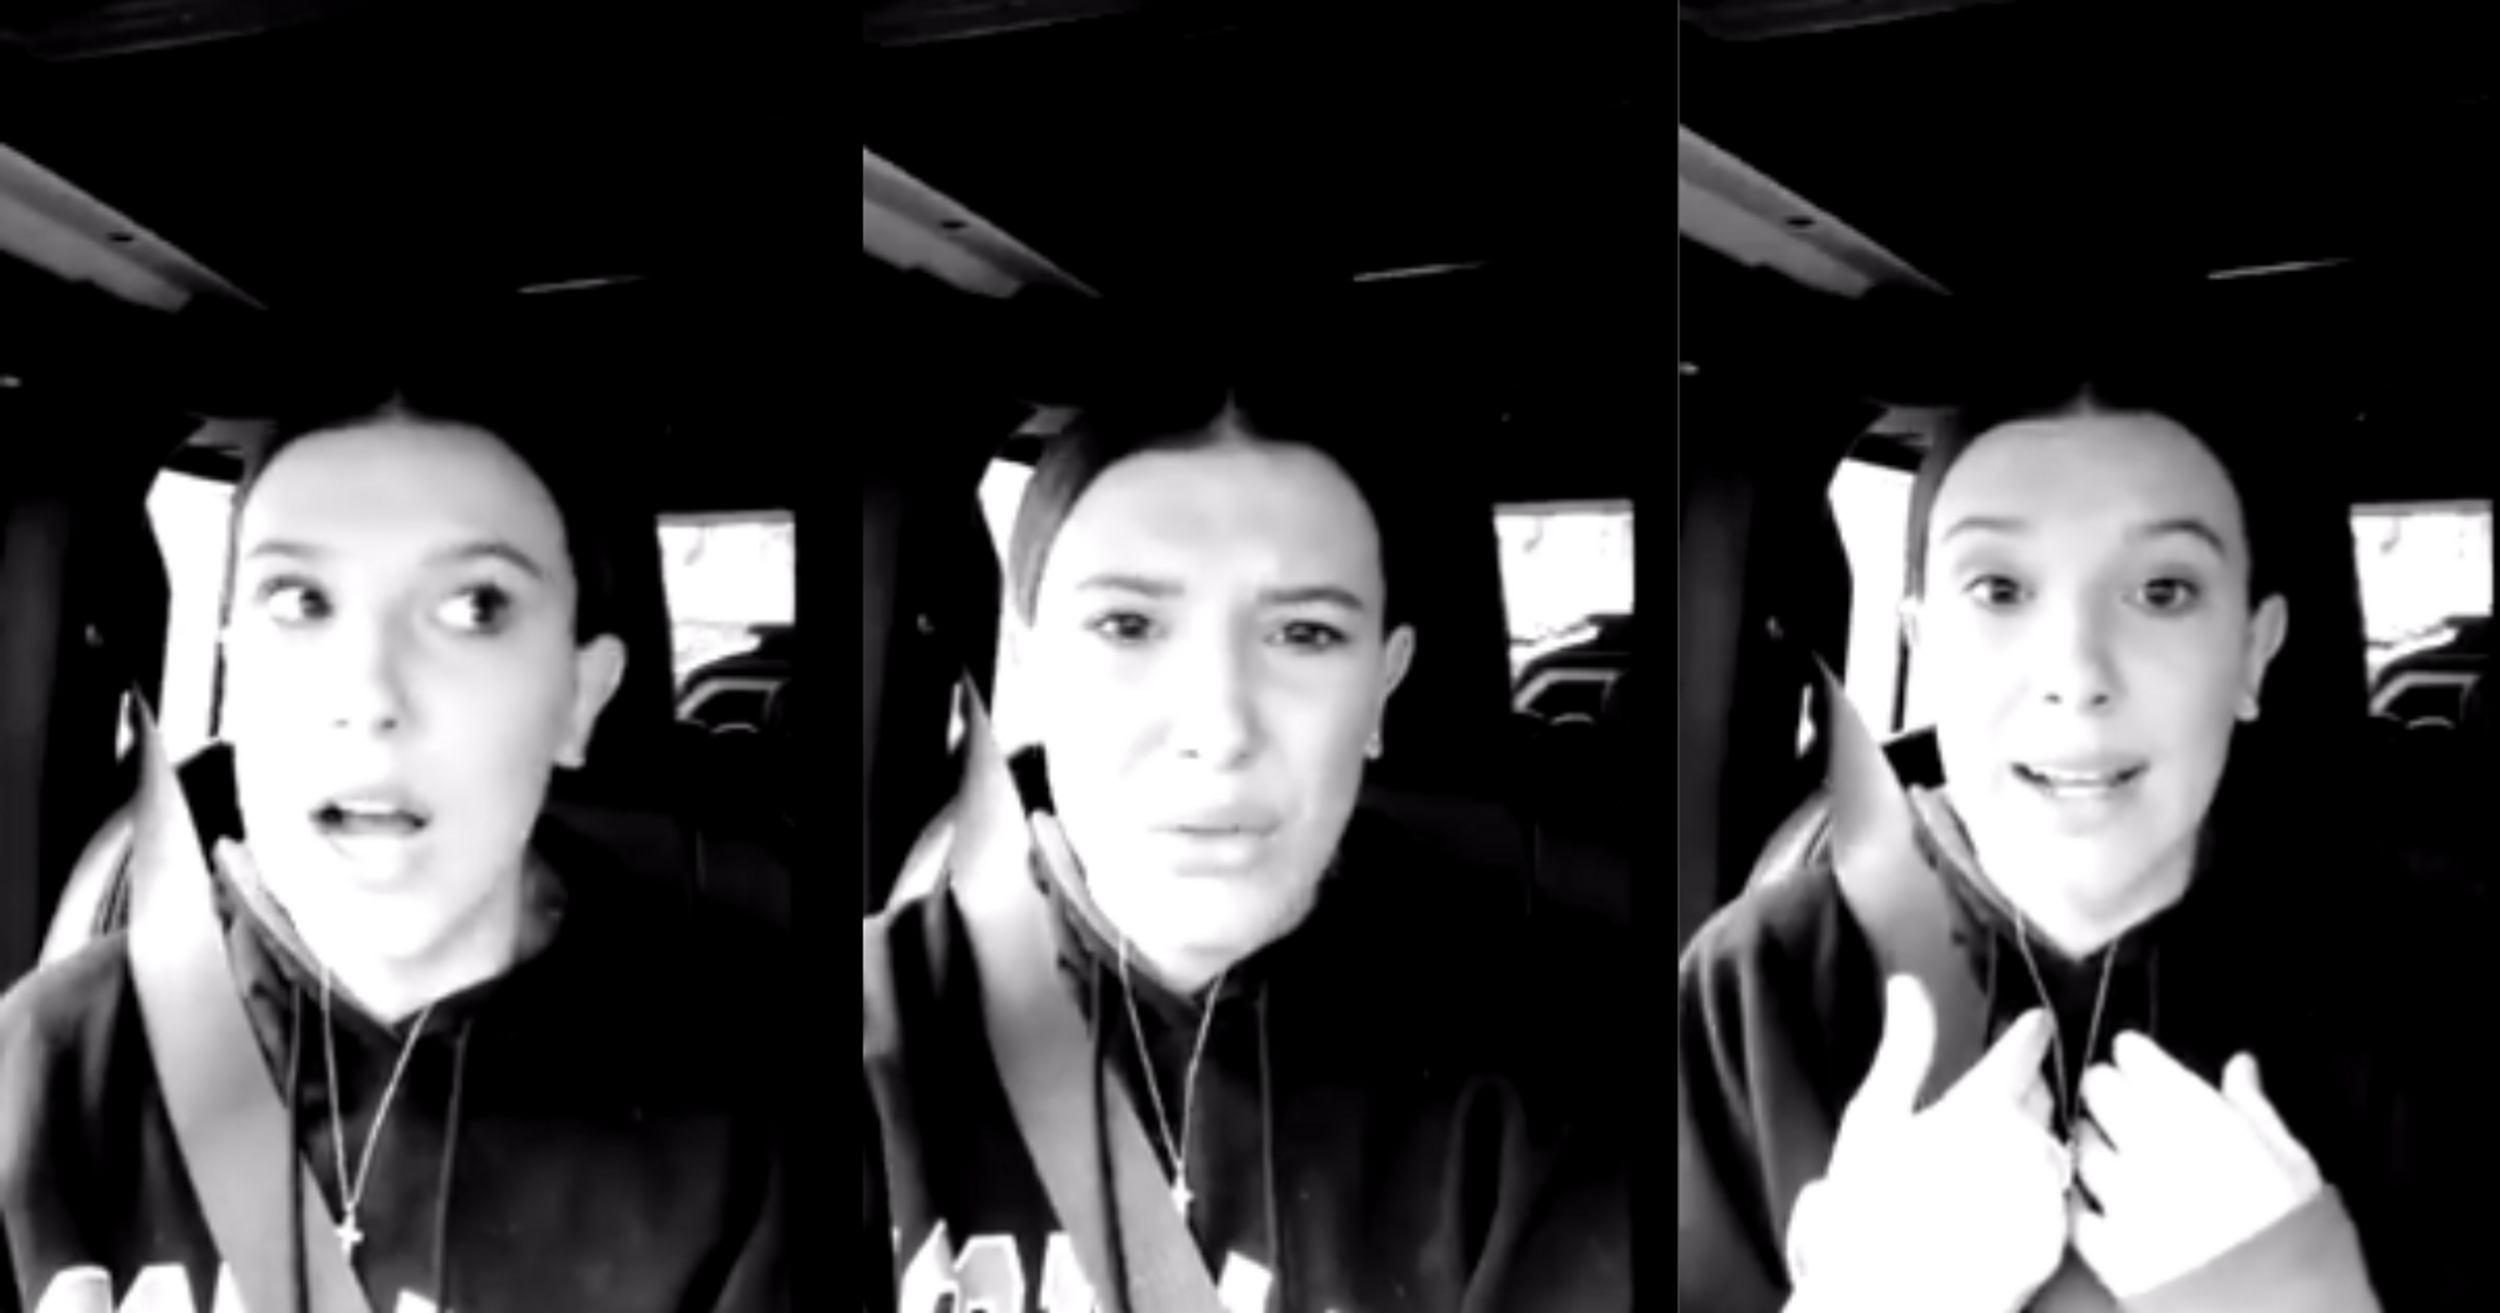 Millie Bobby Brown Breaks Down In Tears While Talking About Being Harassed By A Pushy Fan